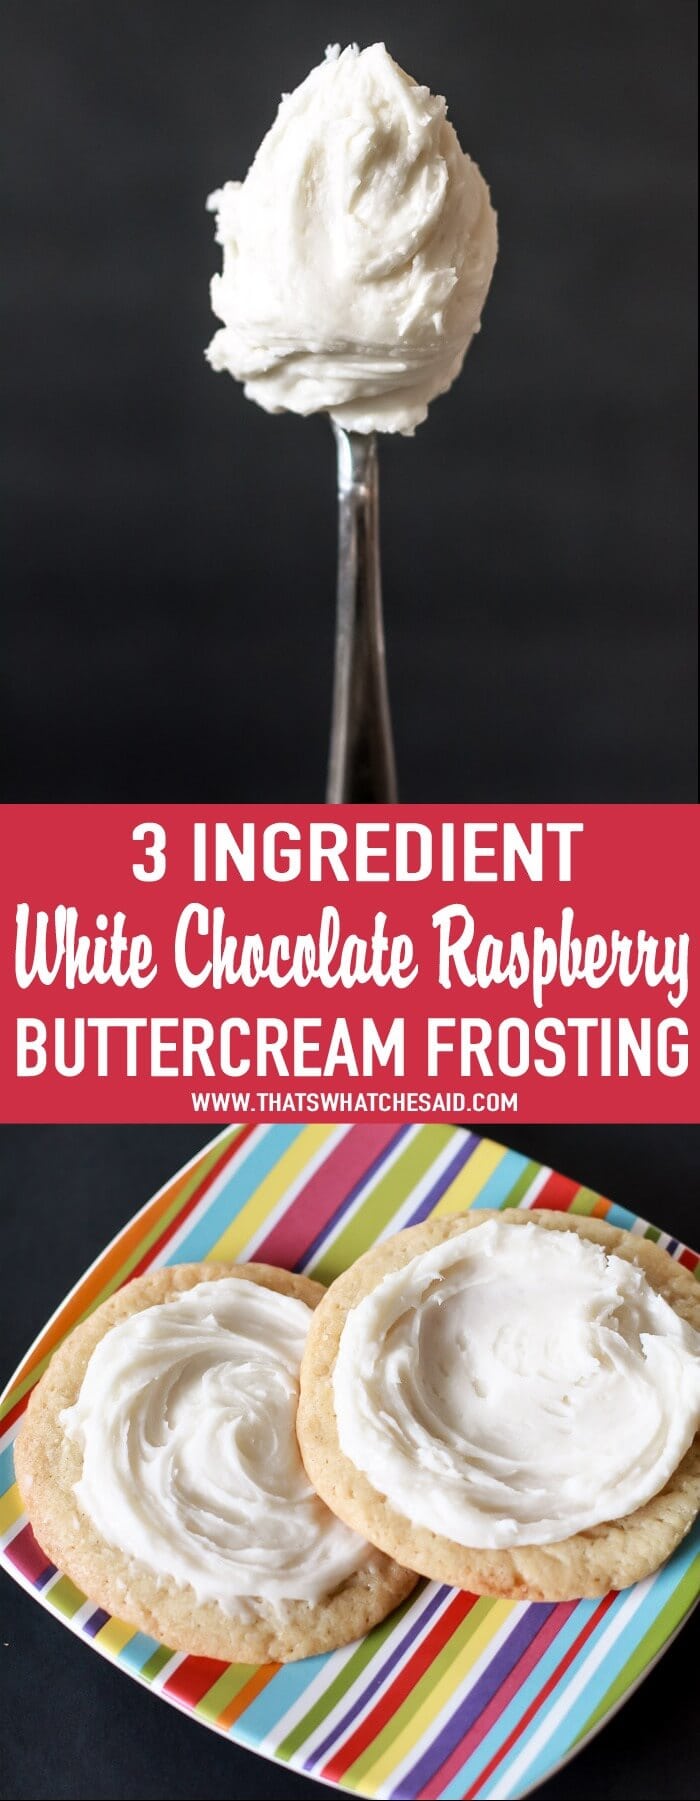 White Chocolate Raspberry 3 Ingredient Buttercream Frosting Recipe at thatswhatchesaid.com